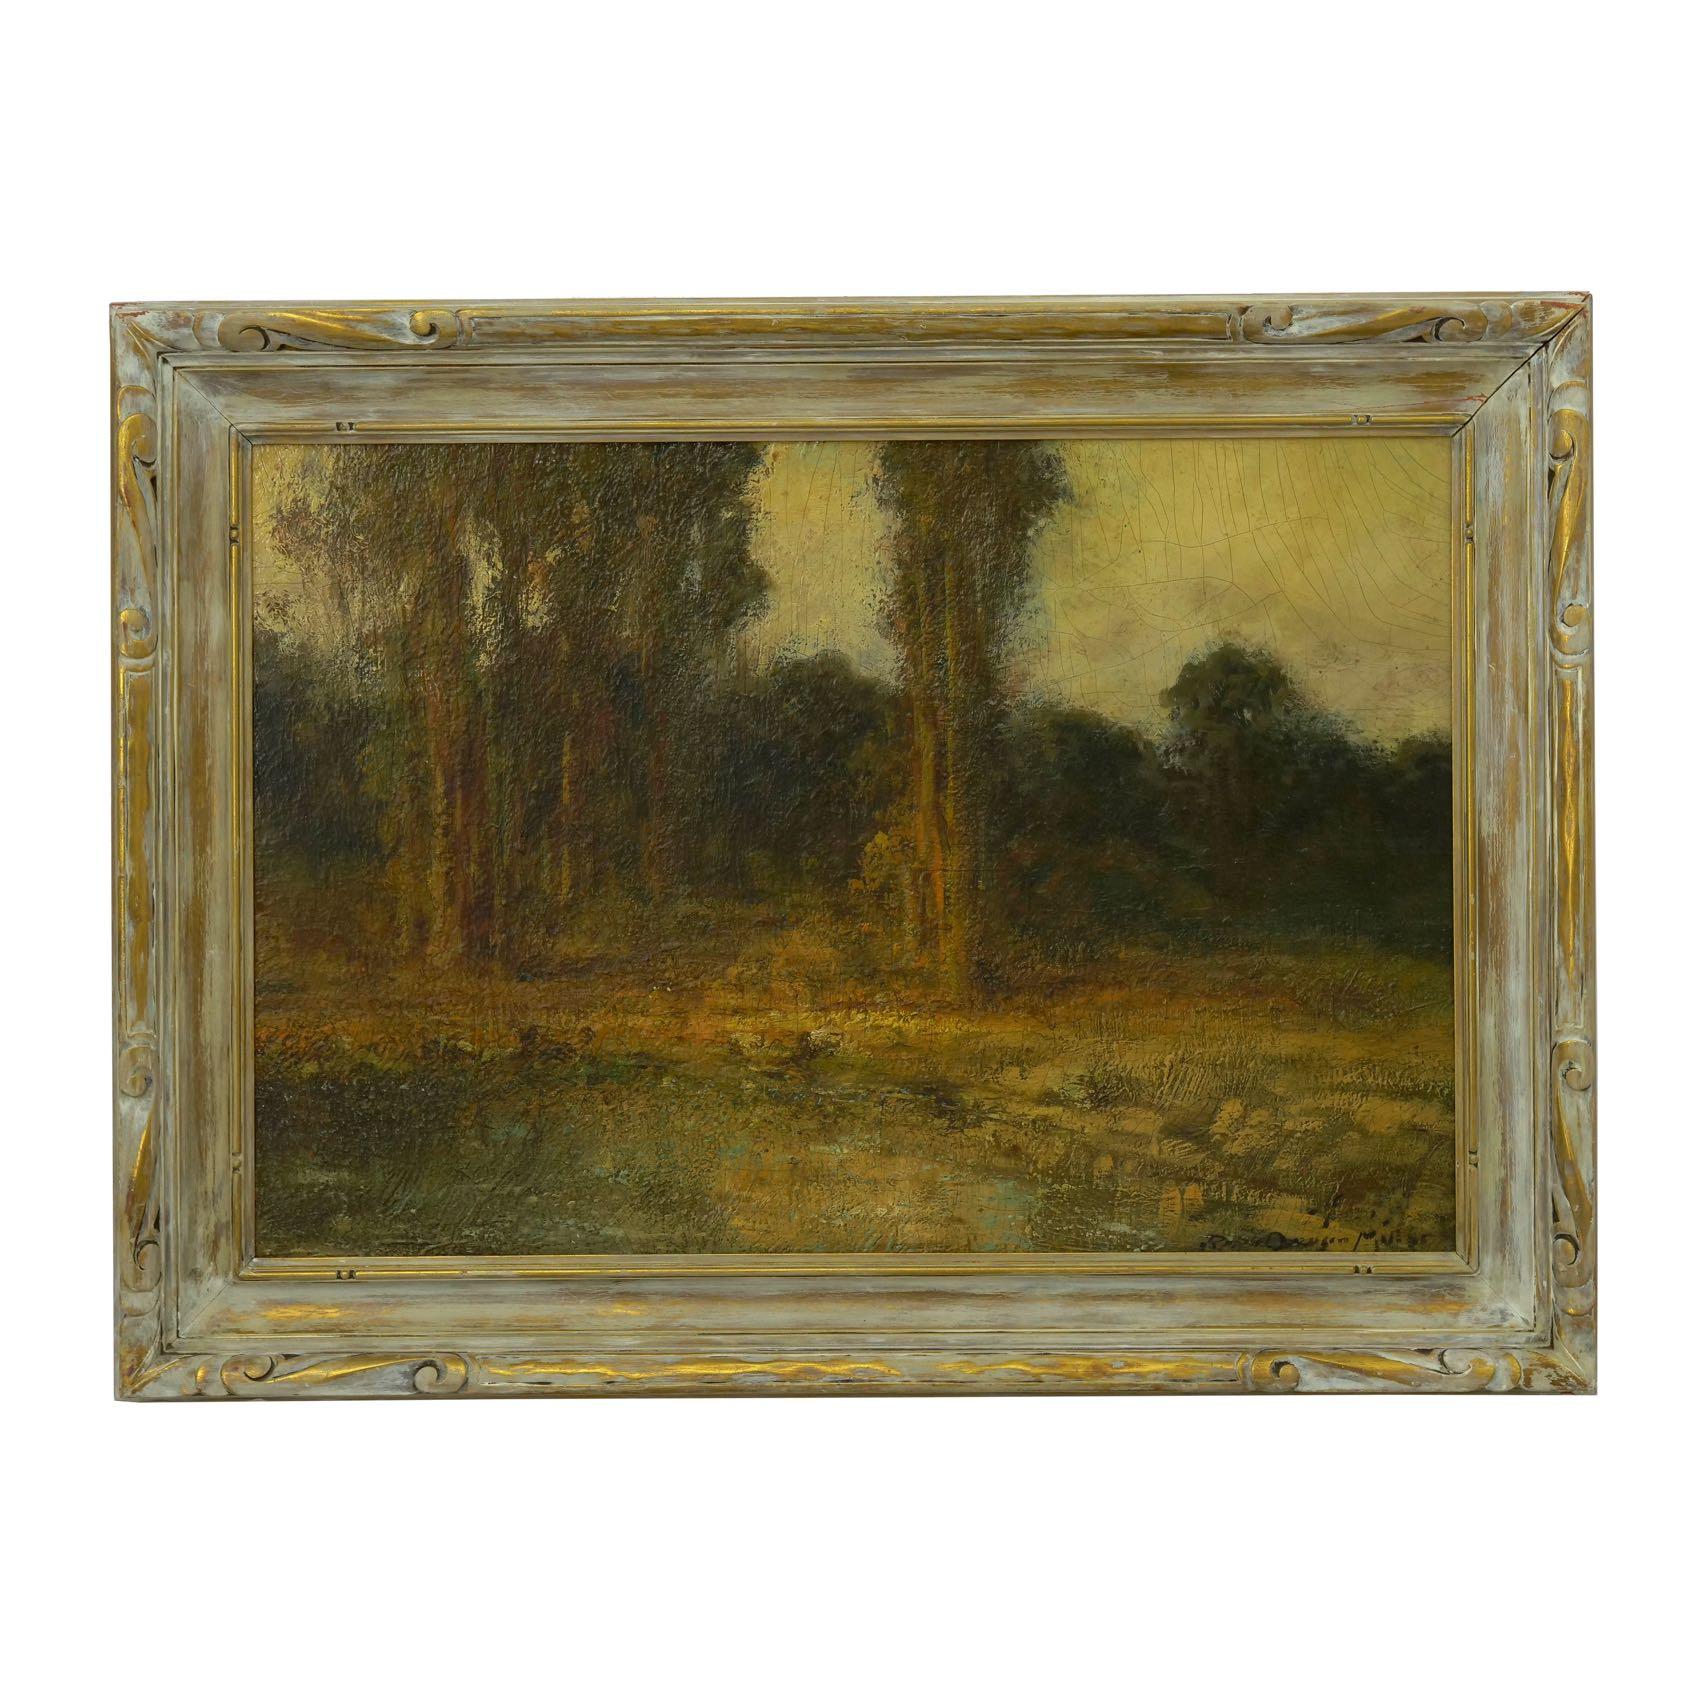 A fine and rare landscape painting by early California artist Ralph Davison Miller (circa 1858-1945). With a chaotic heavy impasto in his brush stroke, Miller brings to life a glade with tall trees before a pool of water. The scene is enlivened with